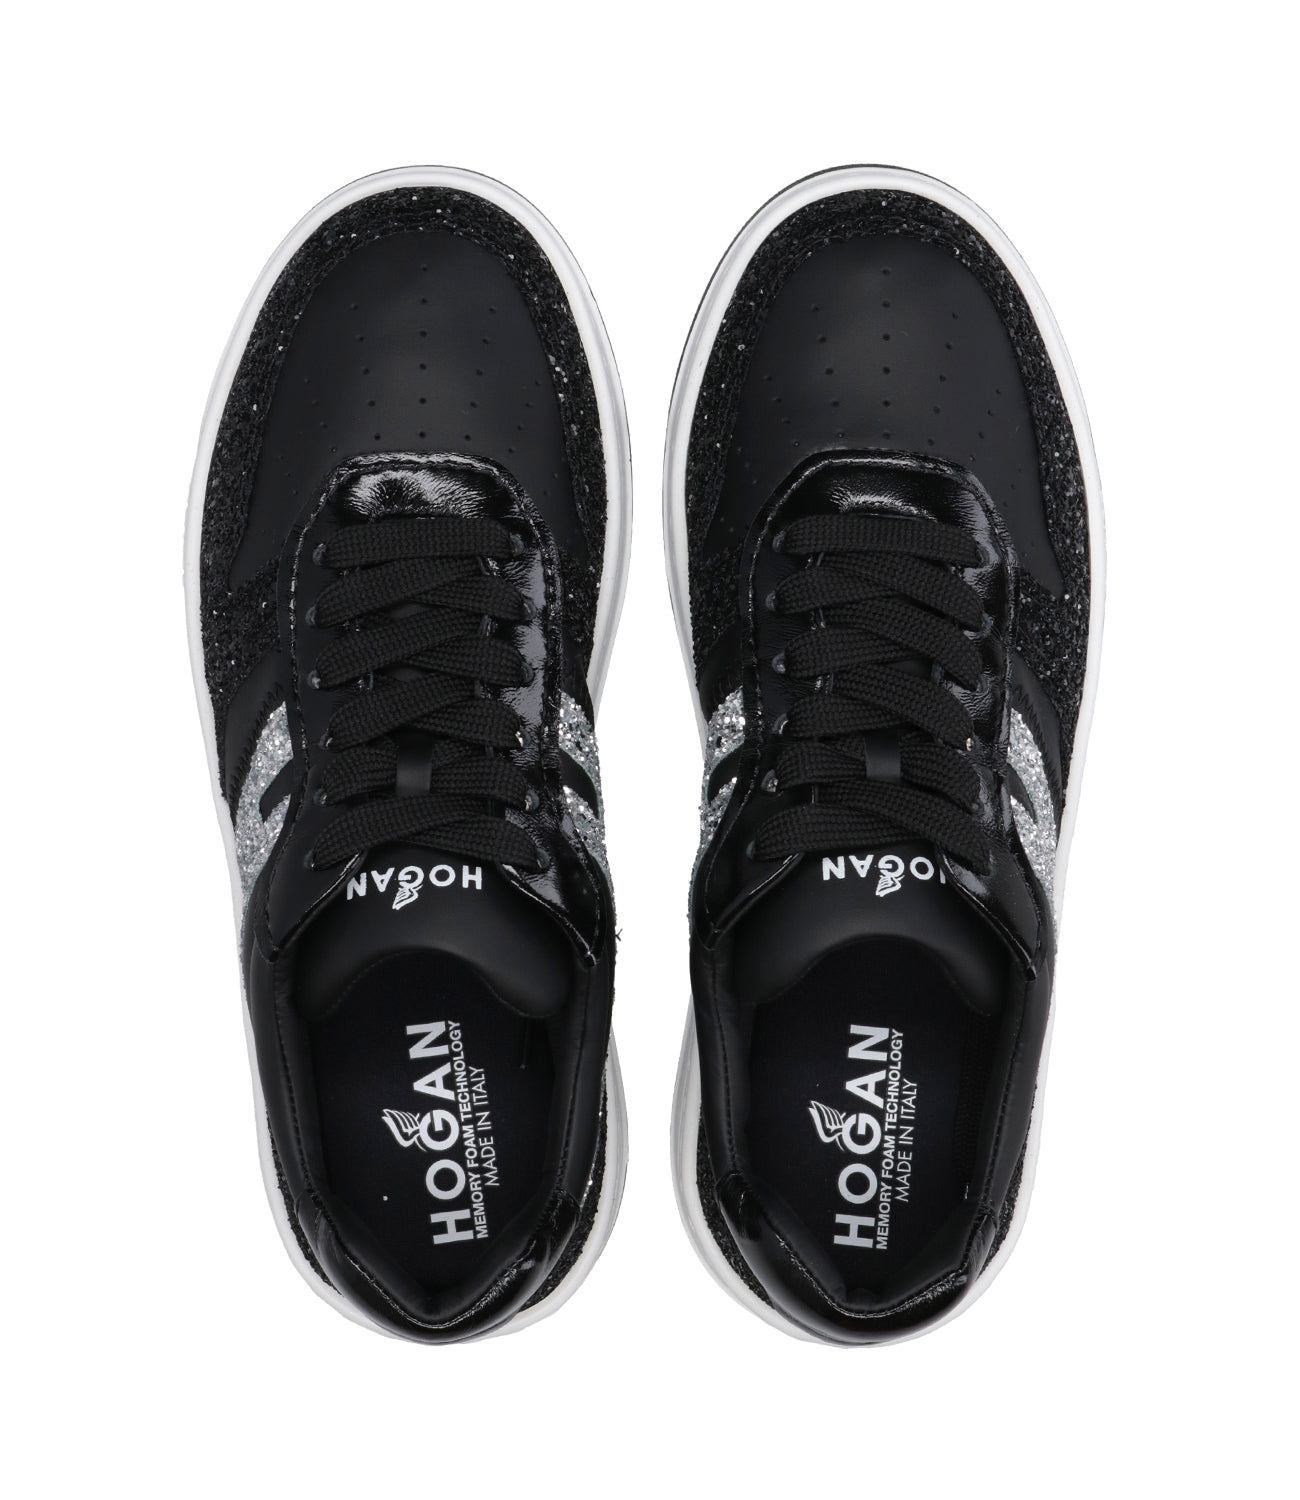 Hogan | Sneakers H630 Lace-up Black and Silver